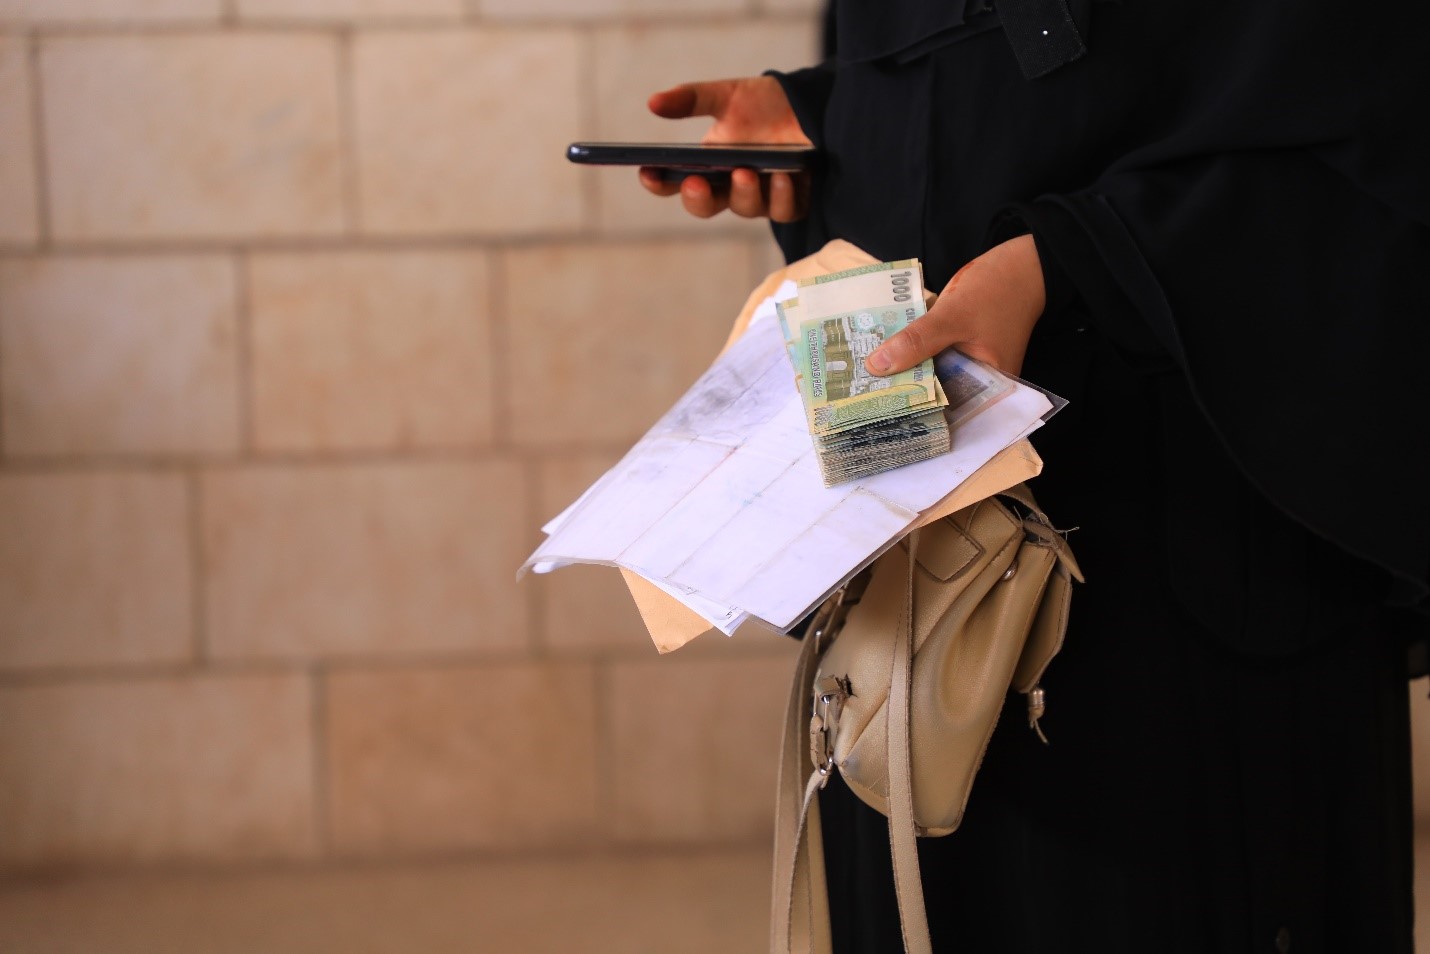 A woman in a black abaya holding a mobile phone and a money